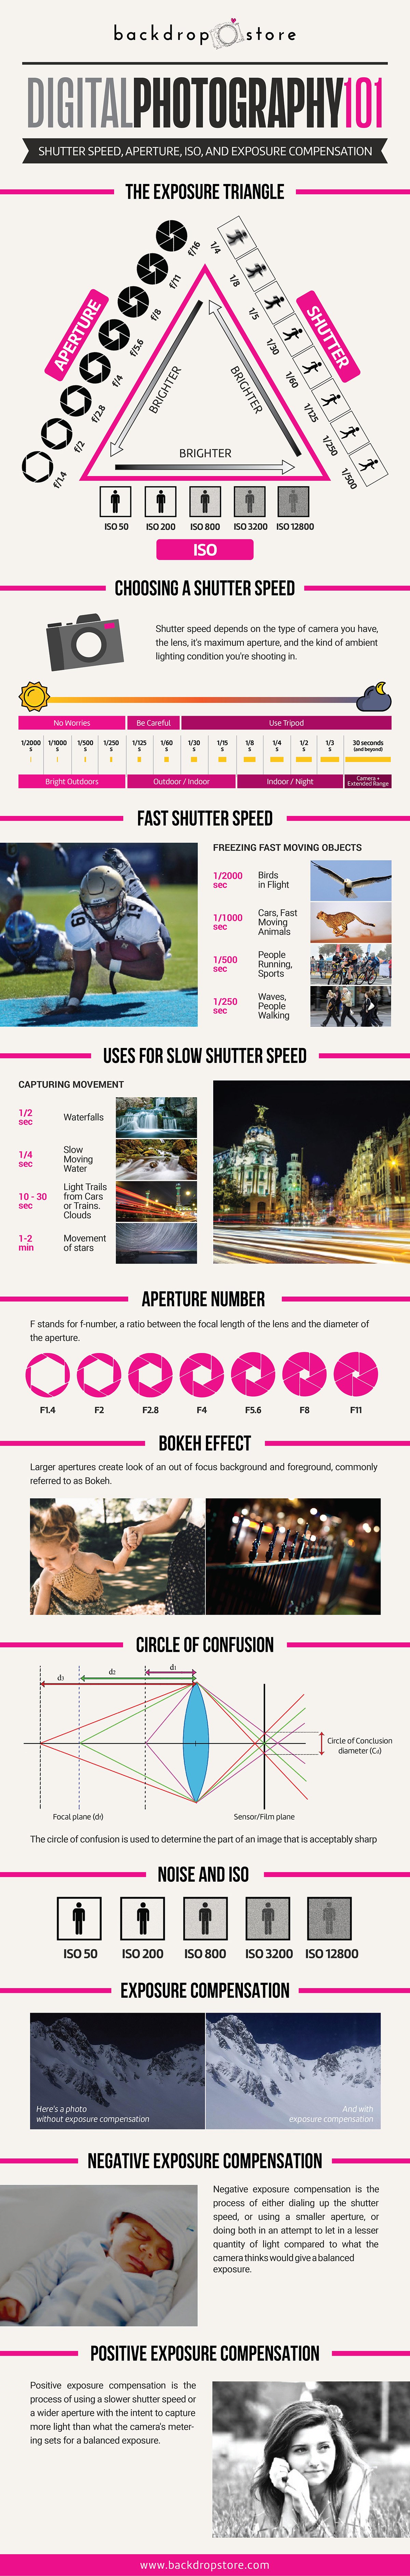 Digital Photography 101 infographic